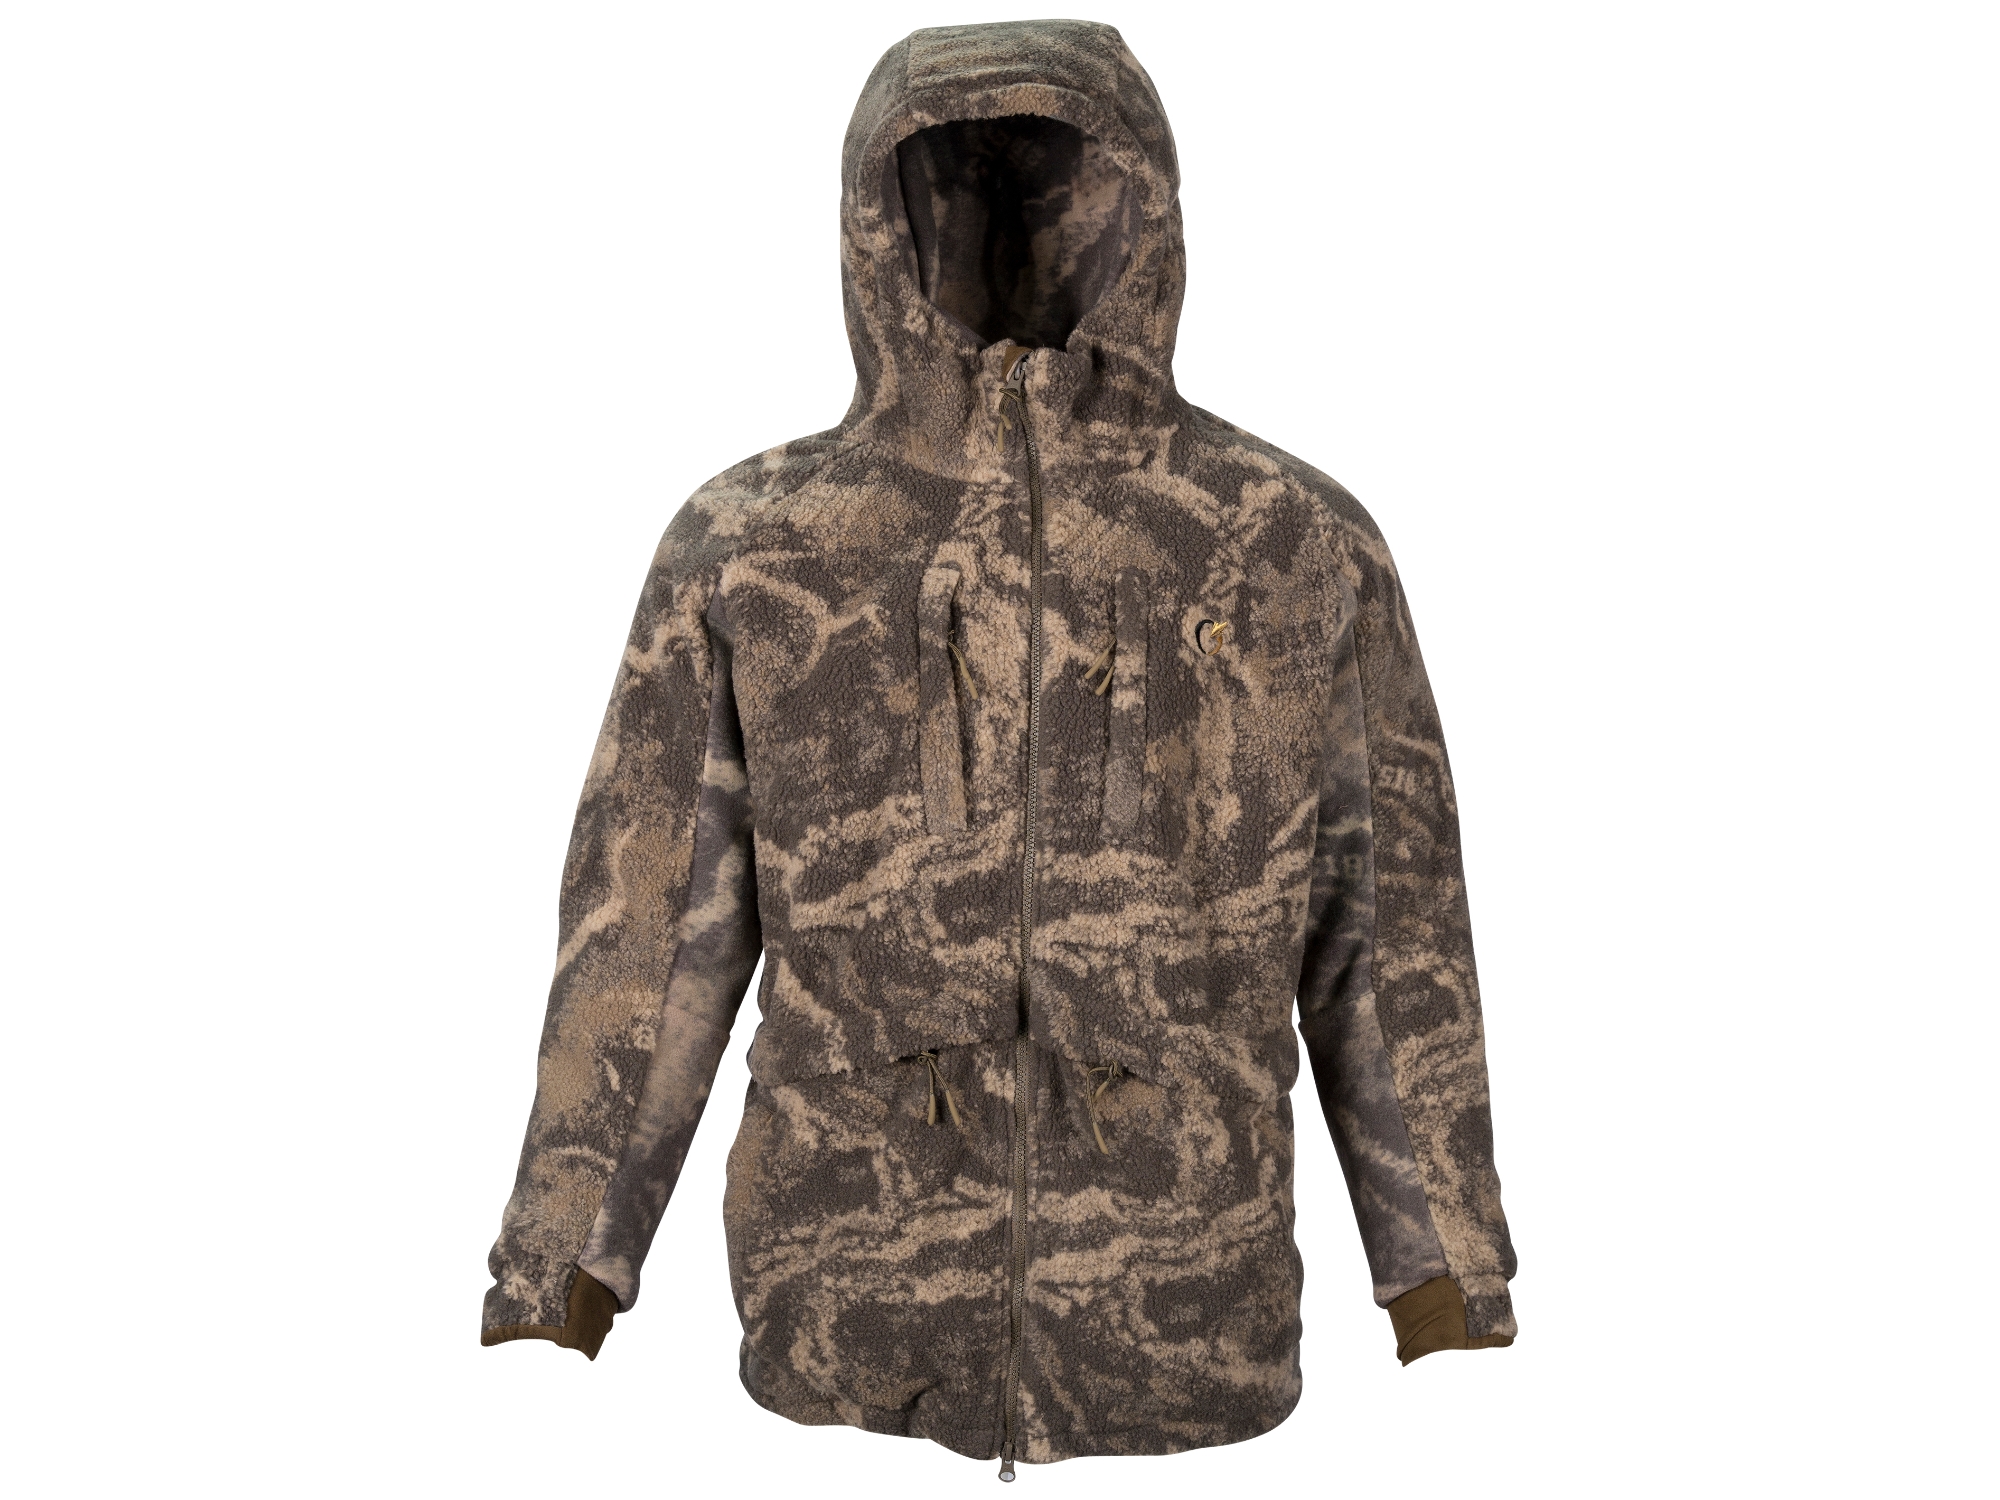 Code of Silence ColdFjall Parka, Extra Large, S-18 CAMO